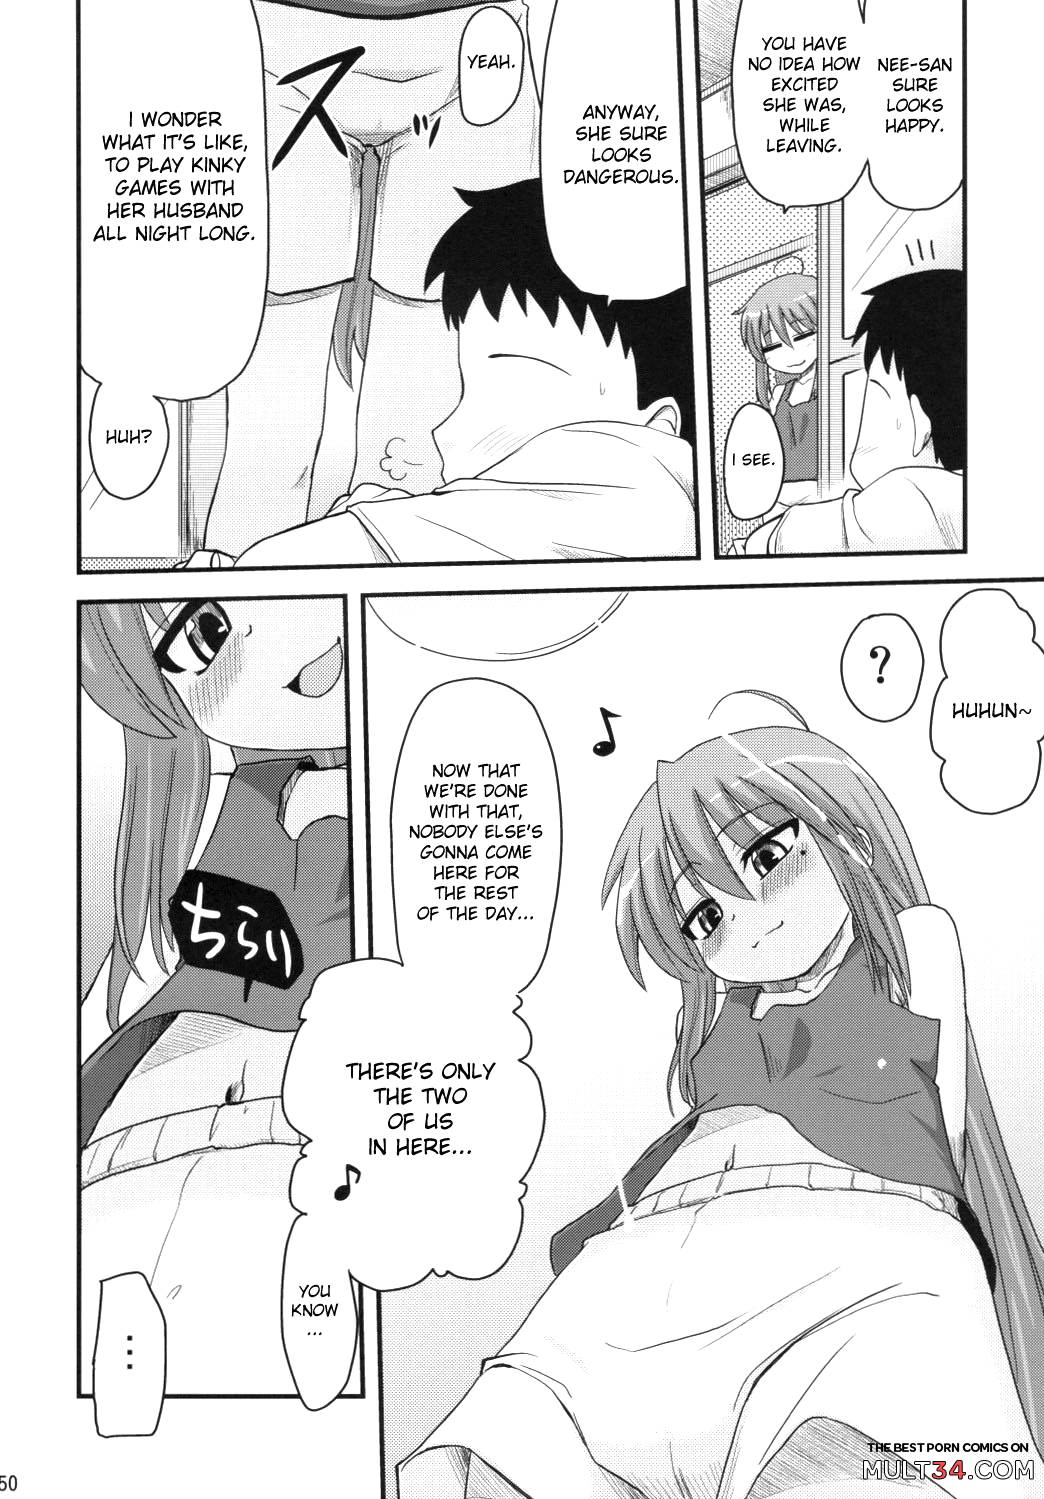 Konata and Oh-zu 4 people each and every one + 1 page 46